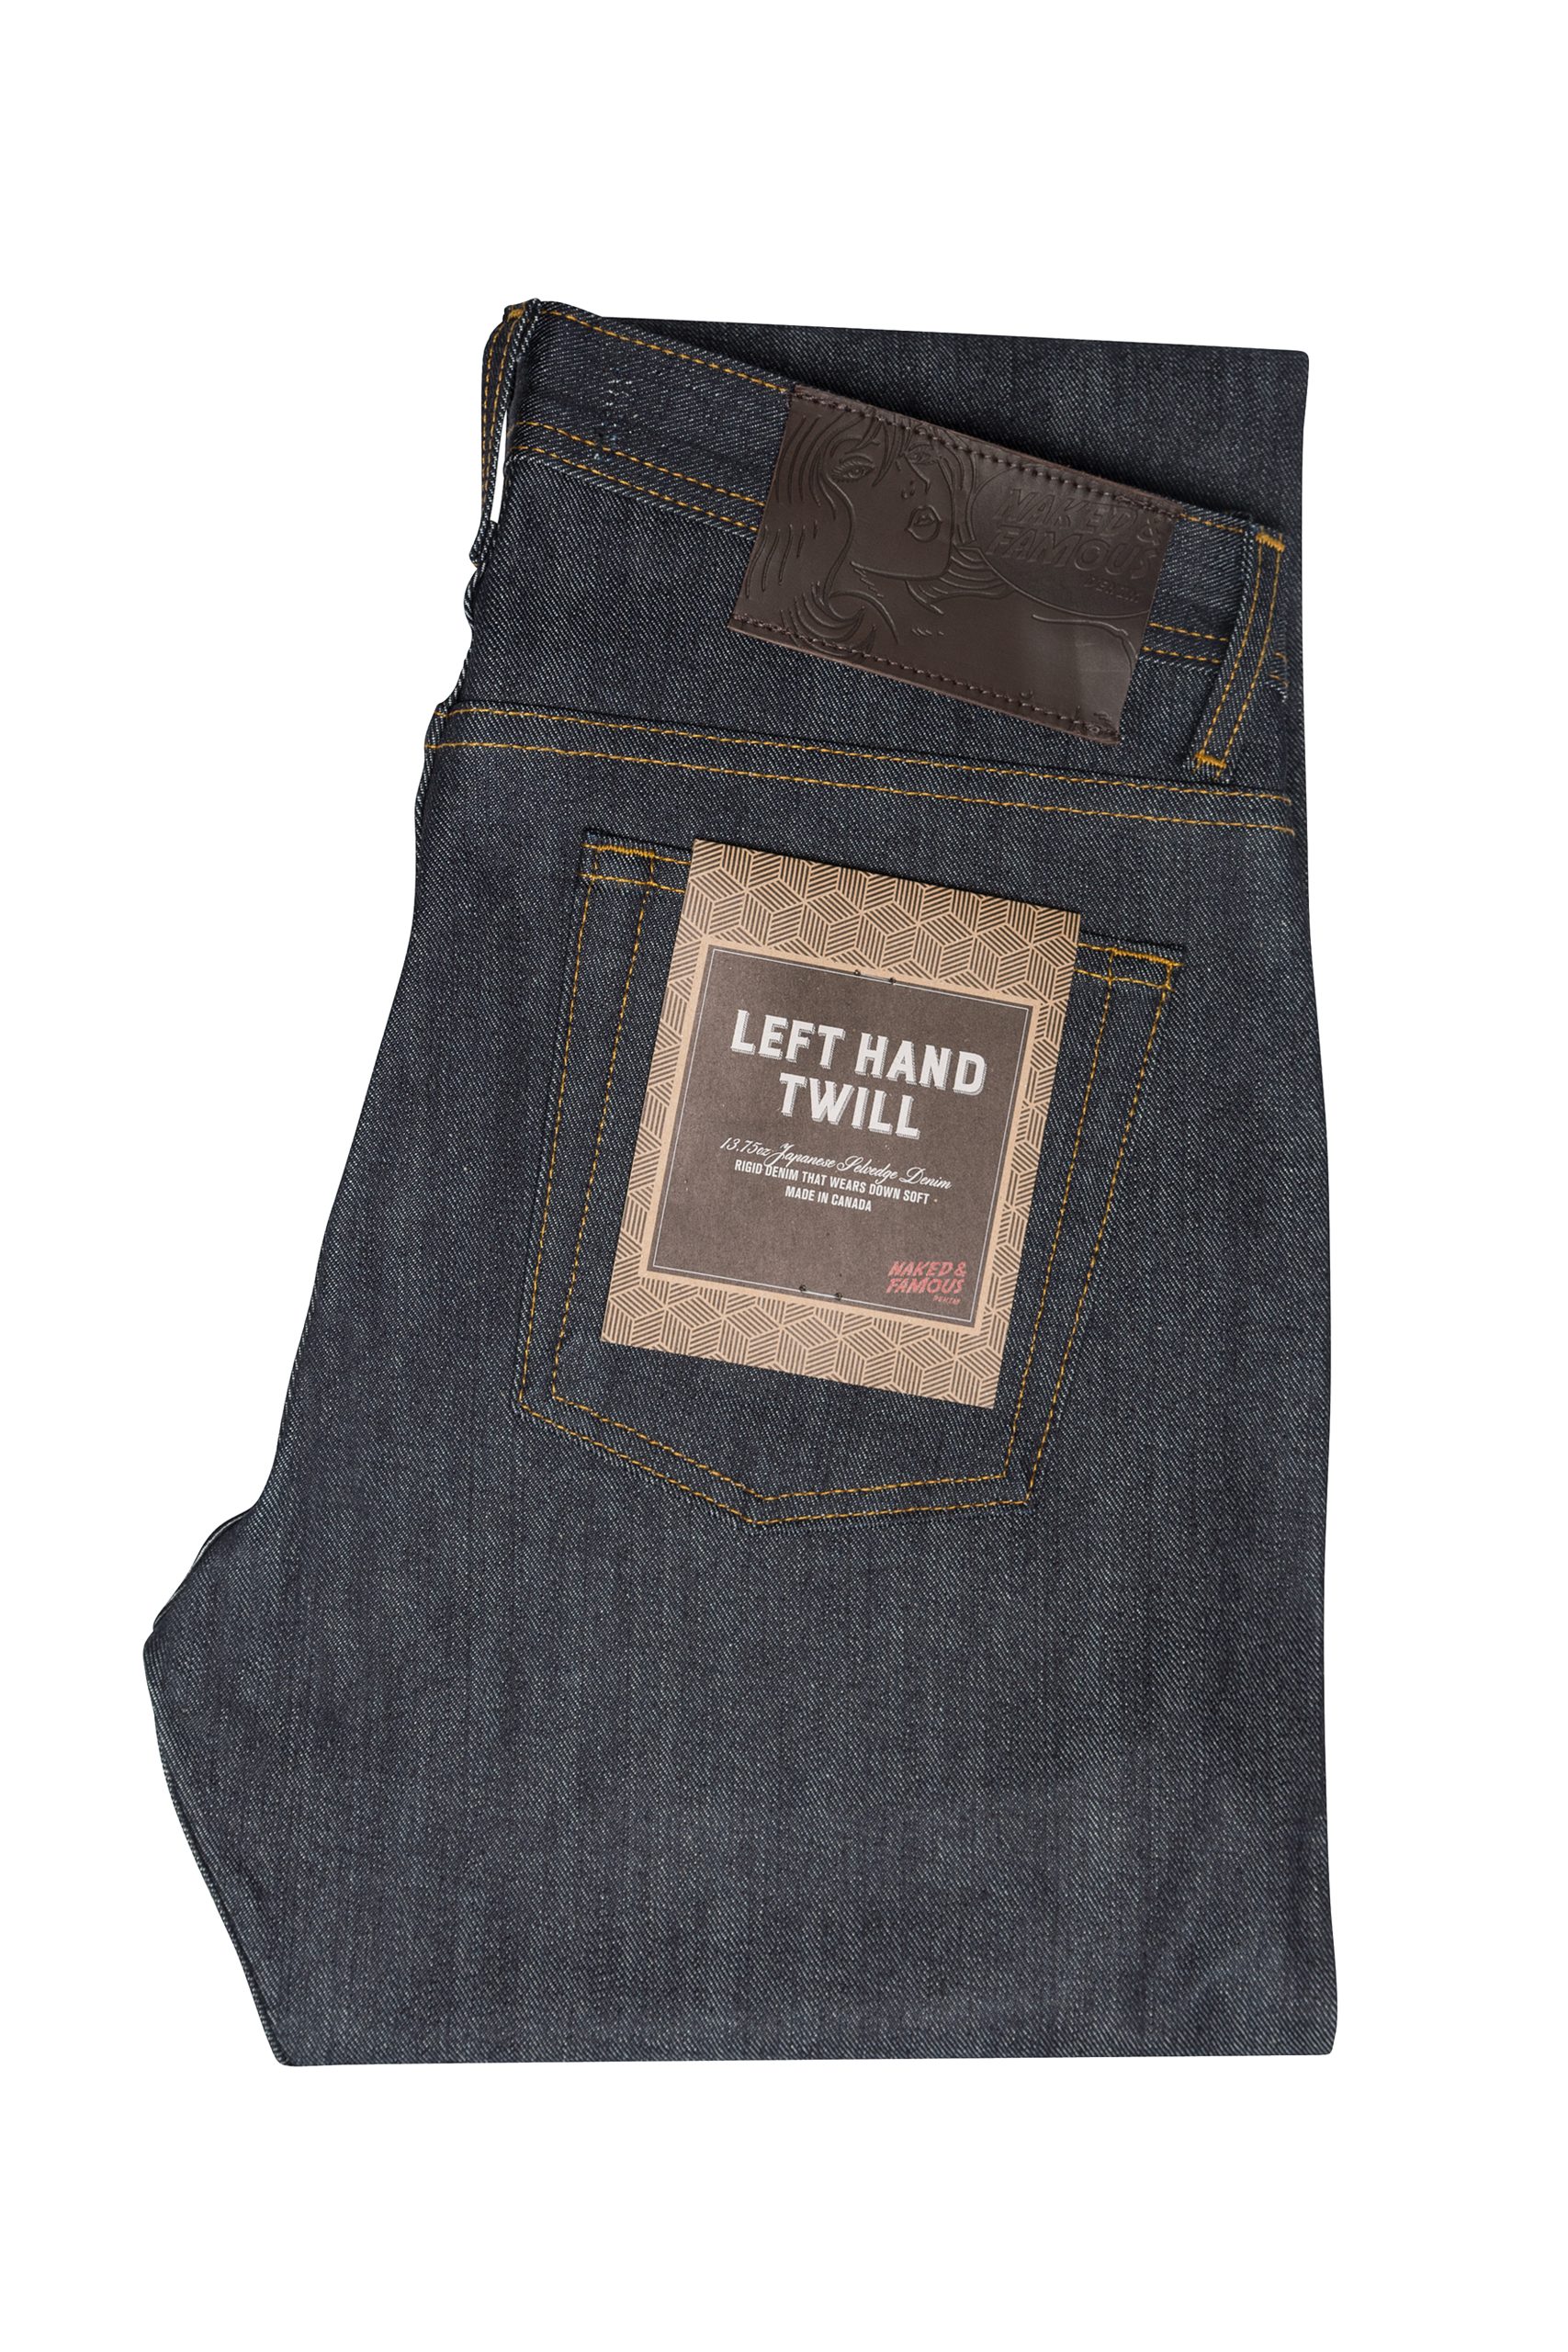 NAKED and FAMOUS Jeans Weird guy LEFT HAND TWILL SELVEDGE INDIGO